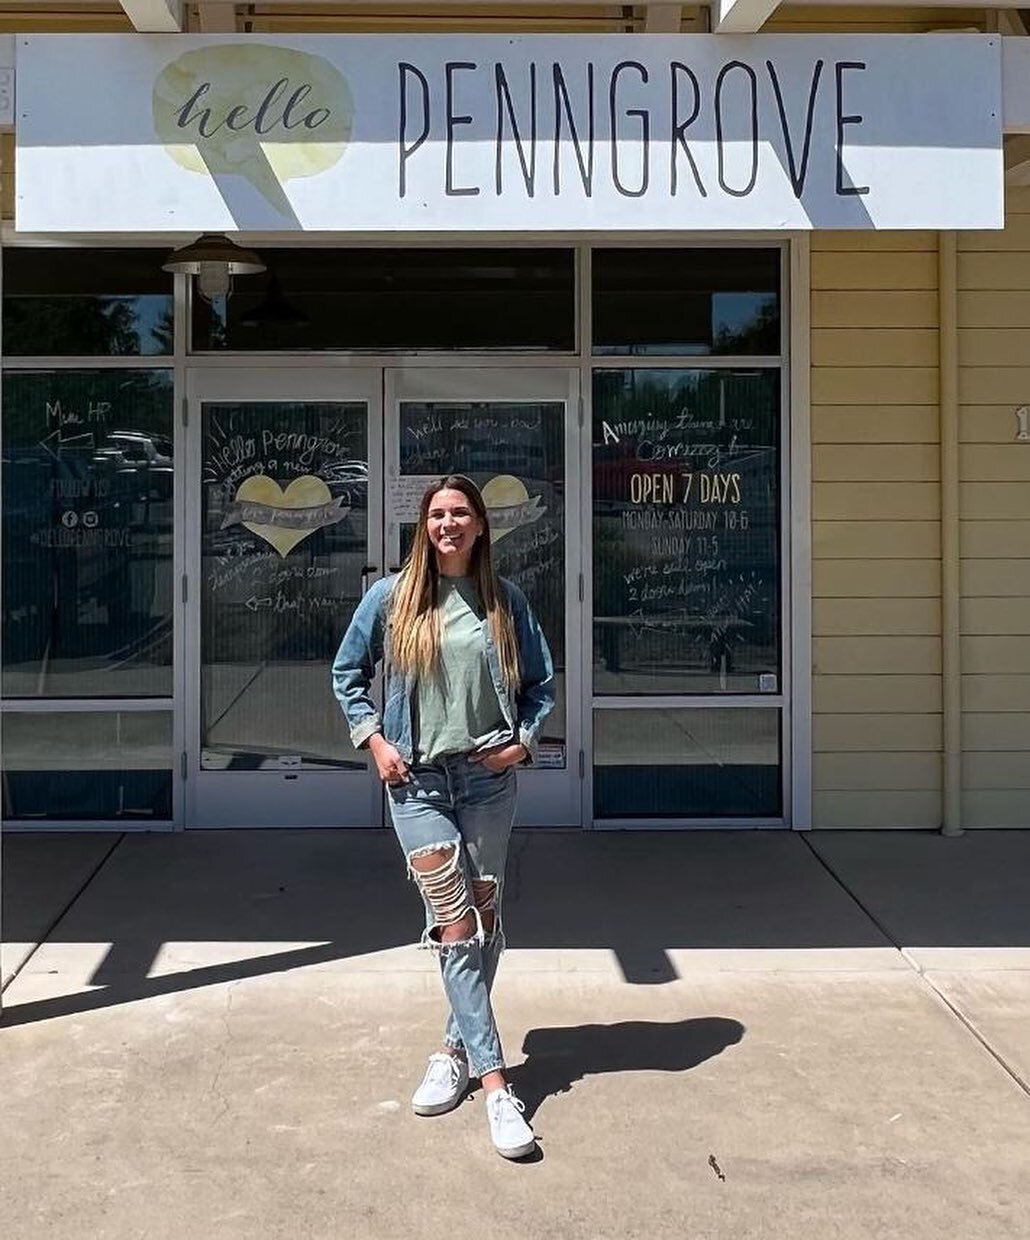 Whether you are looking for the perfect gift or fun stocking stuffers, Hello Penngrove is a must stop destination.  The offering at Hello Penngrove is artfully curated by the heart of this woman-owned and run company, Kaitlin Loewenthal, a Penngrove 